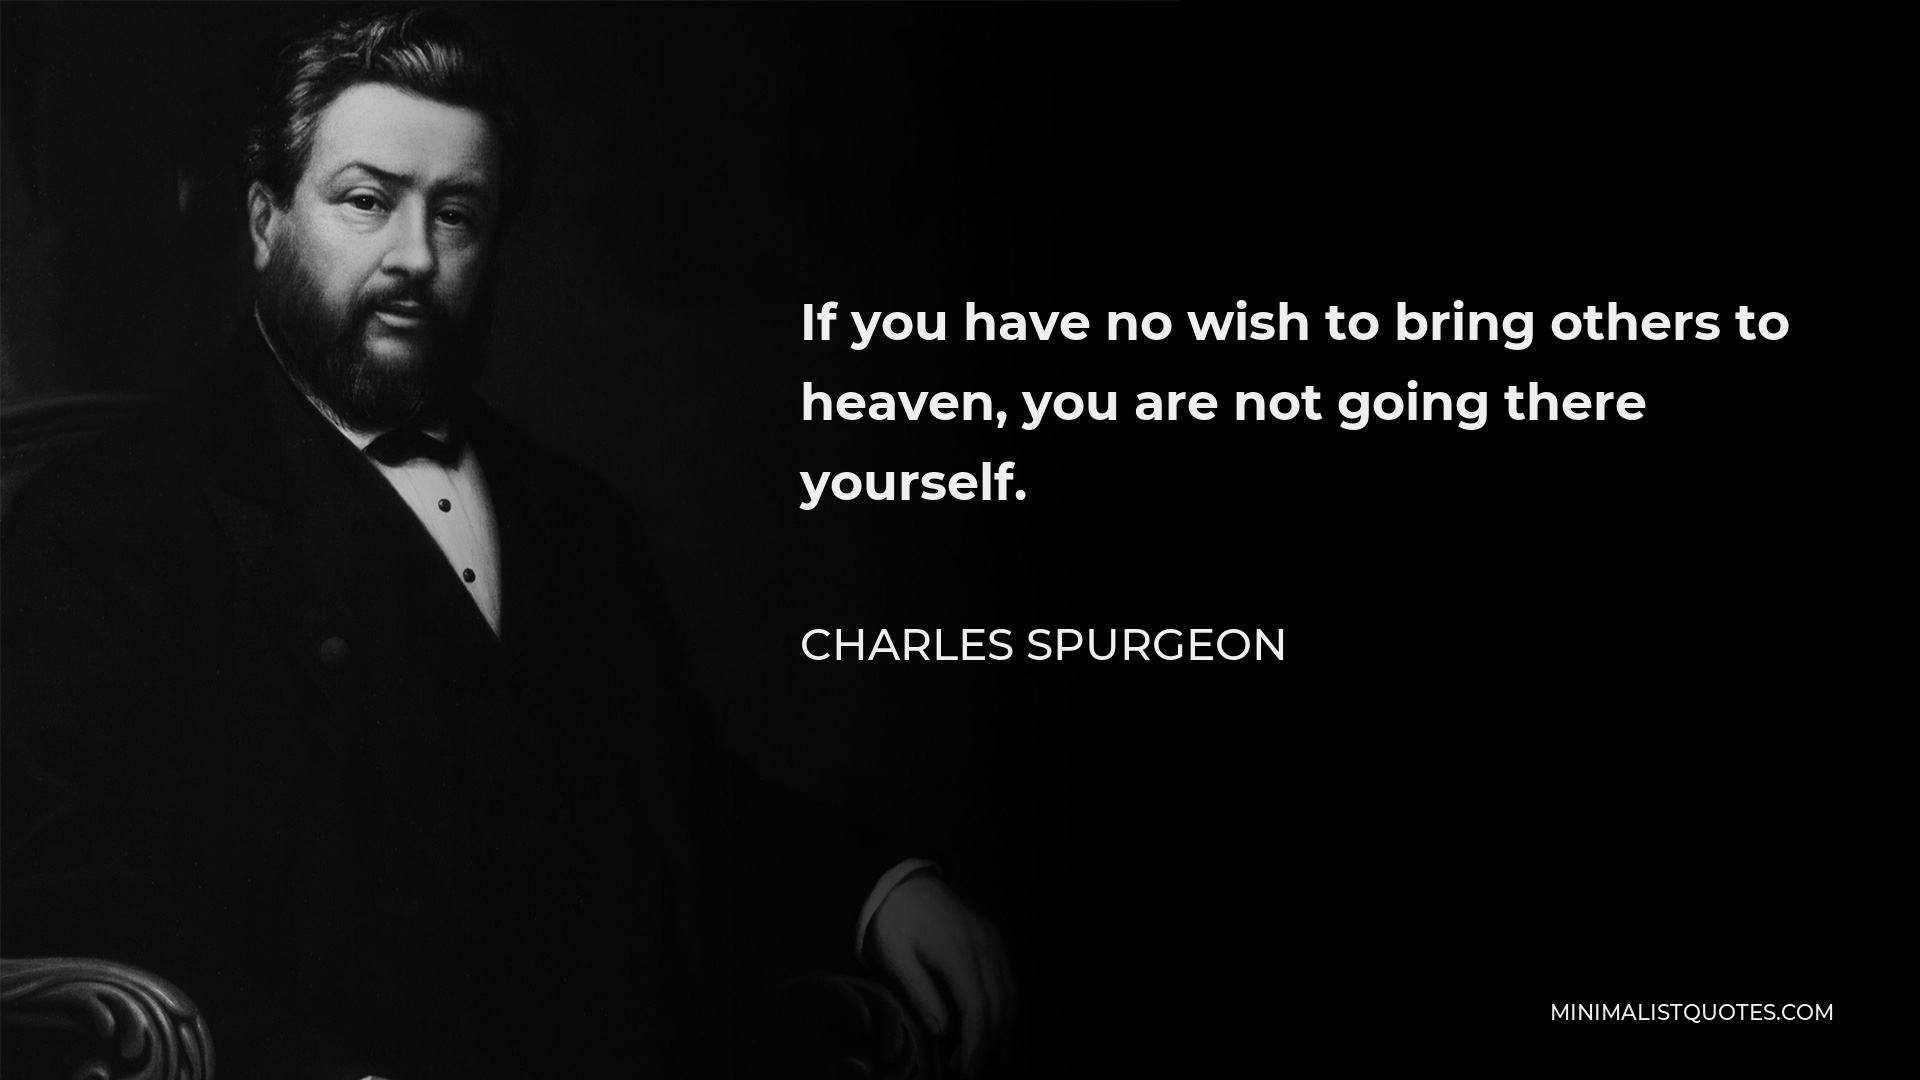 Charles Spurgeon Quote - If you have no wish to bring others to heaven, you are not going there yourself.